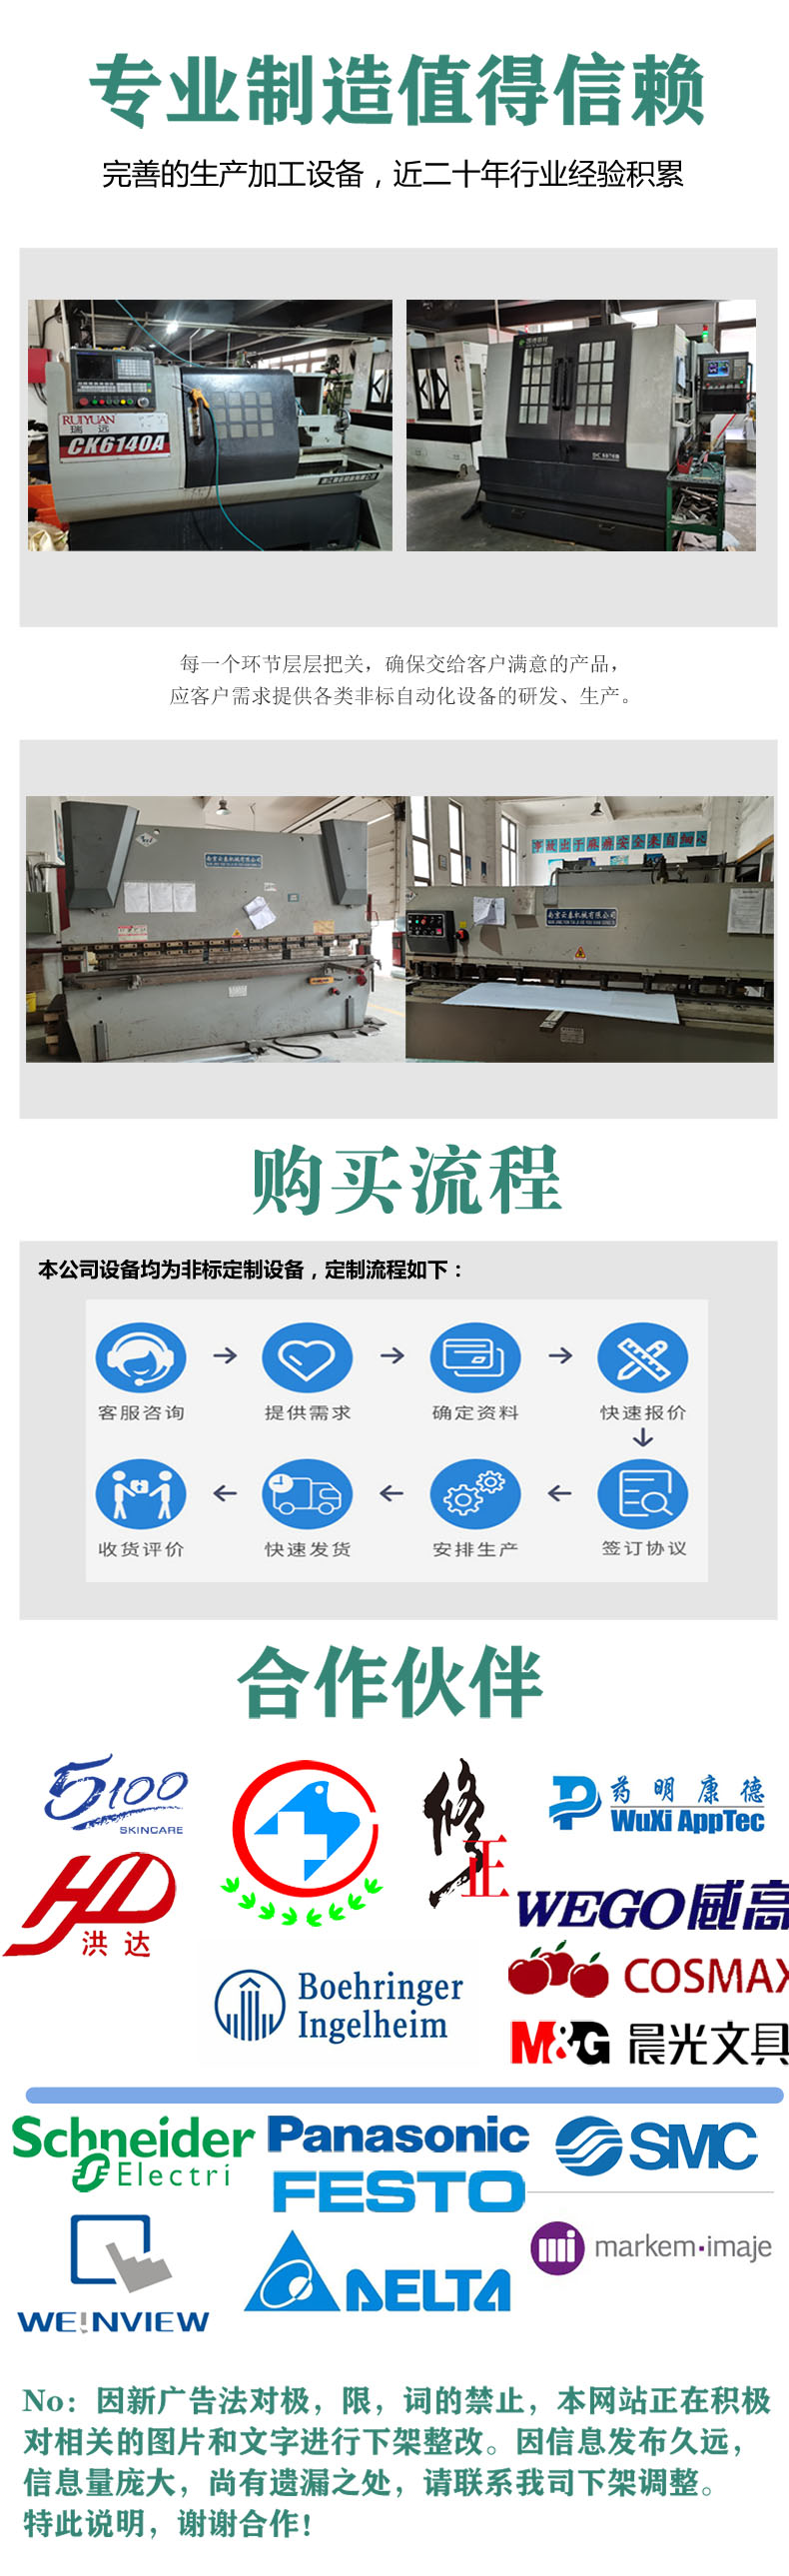 Shengqi manufacturer specializes in providing fully automated and unmanned automatic material handling machines that can be customized